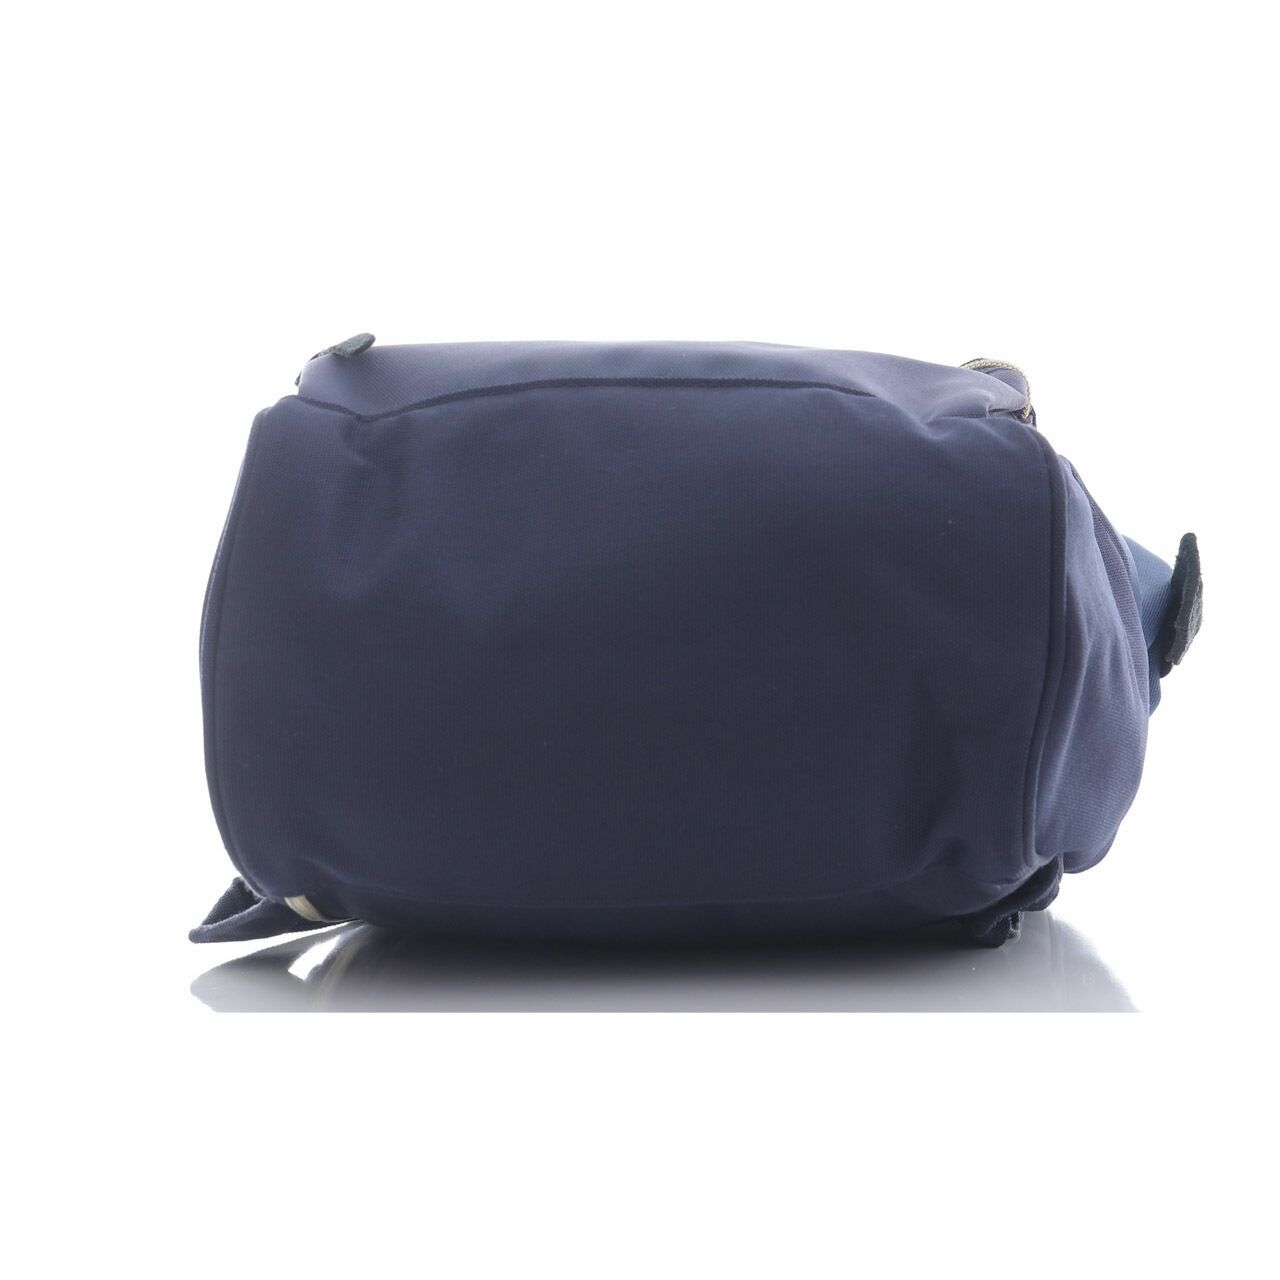 Anello Navy Backpack